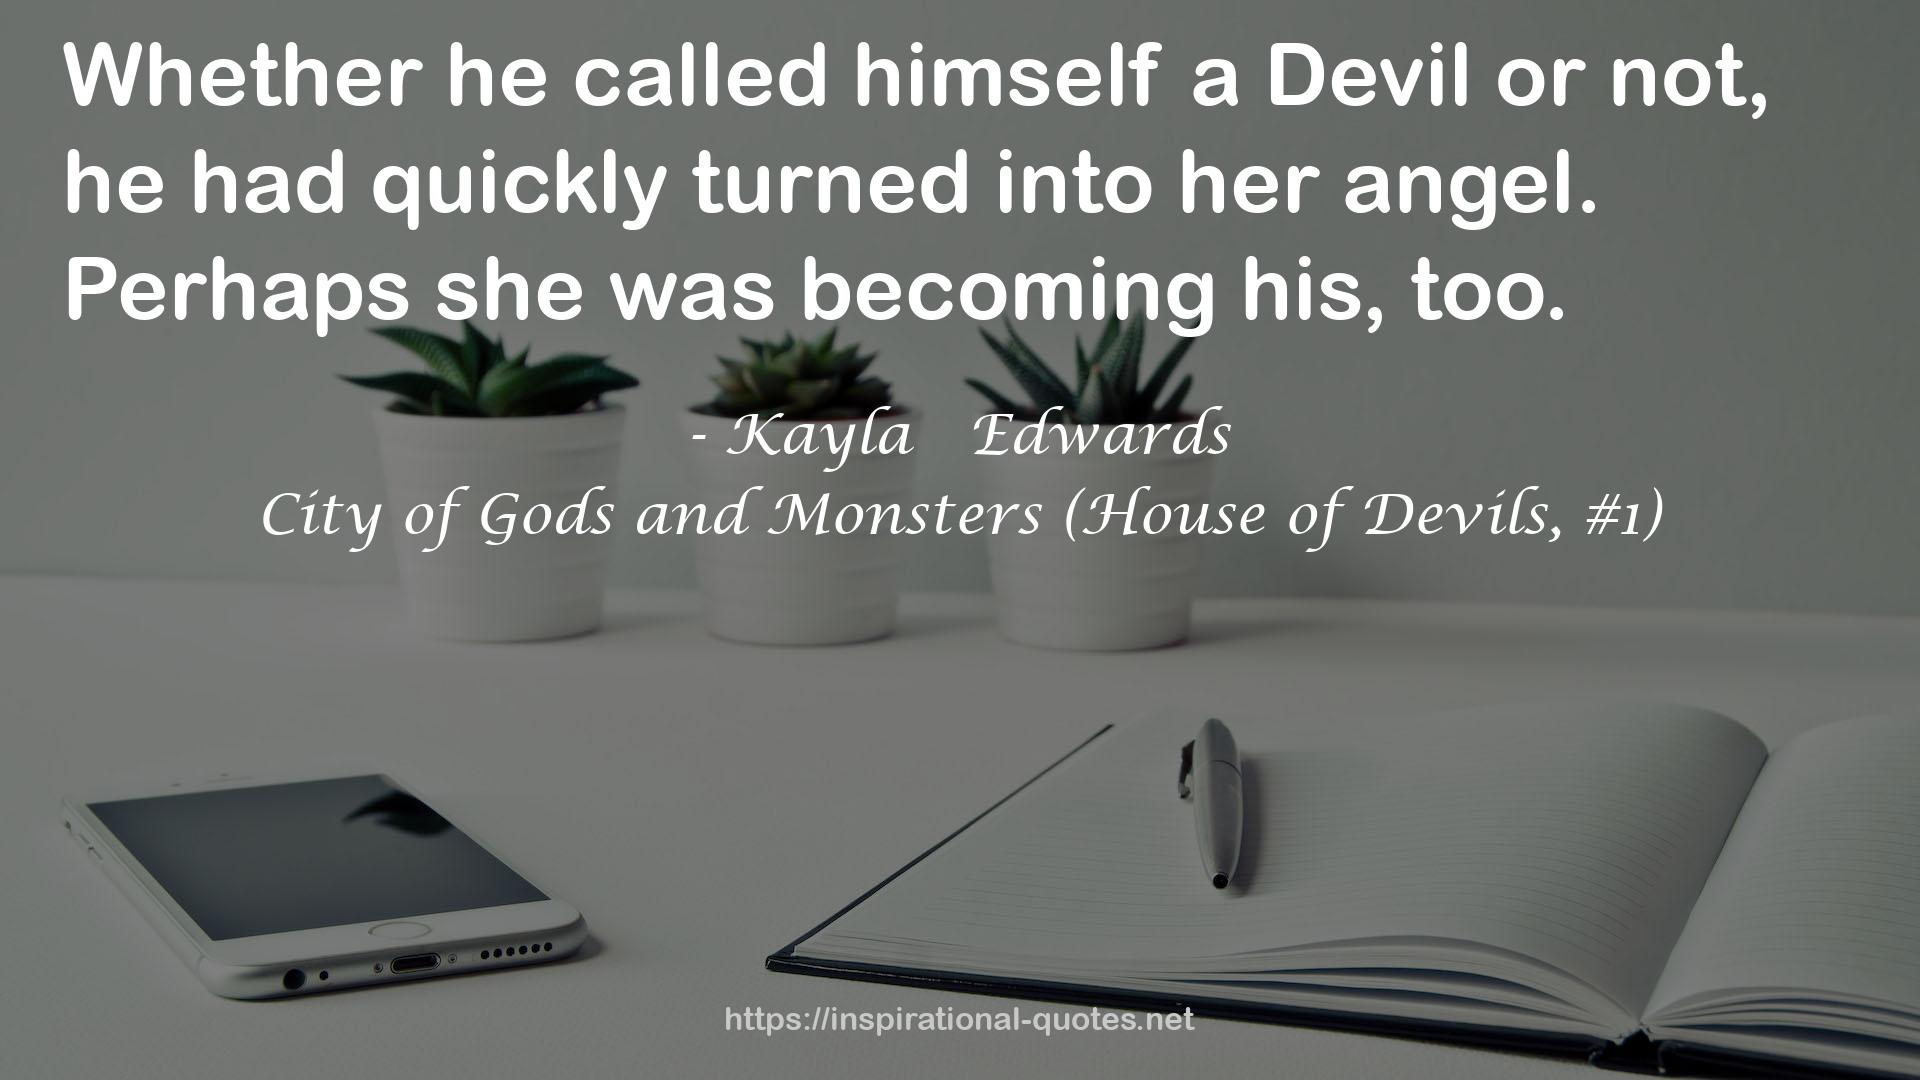 City of Gods and Monsters (House of Devils, #1) QUOTES